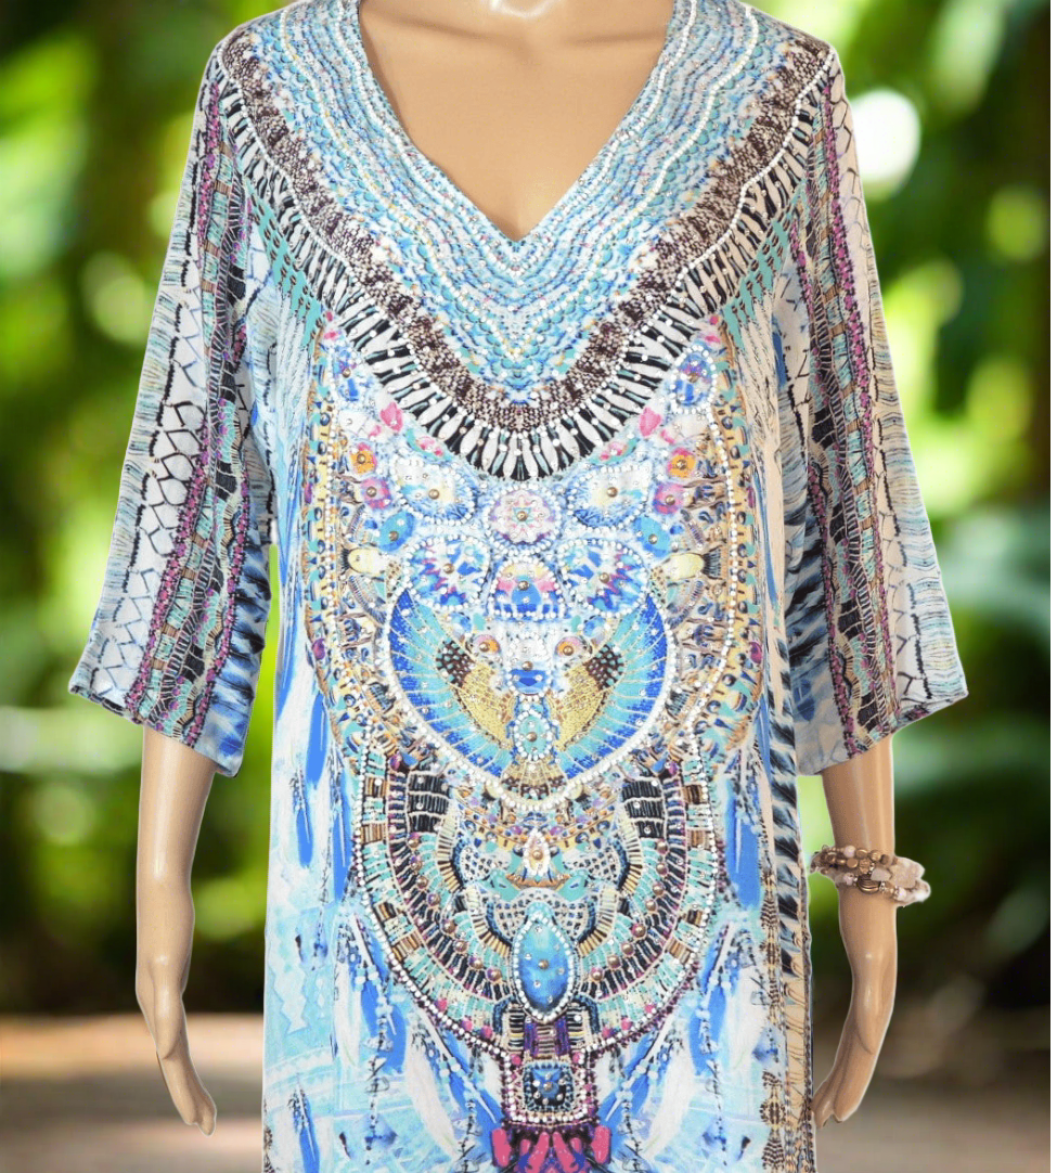 Cleopatra Silk Hand beaded Tunic Dress by Fashion Spectrum - Kaftans that Bling